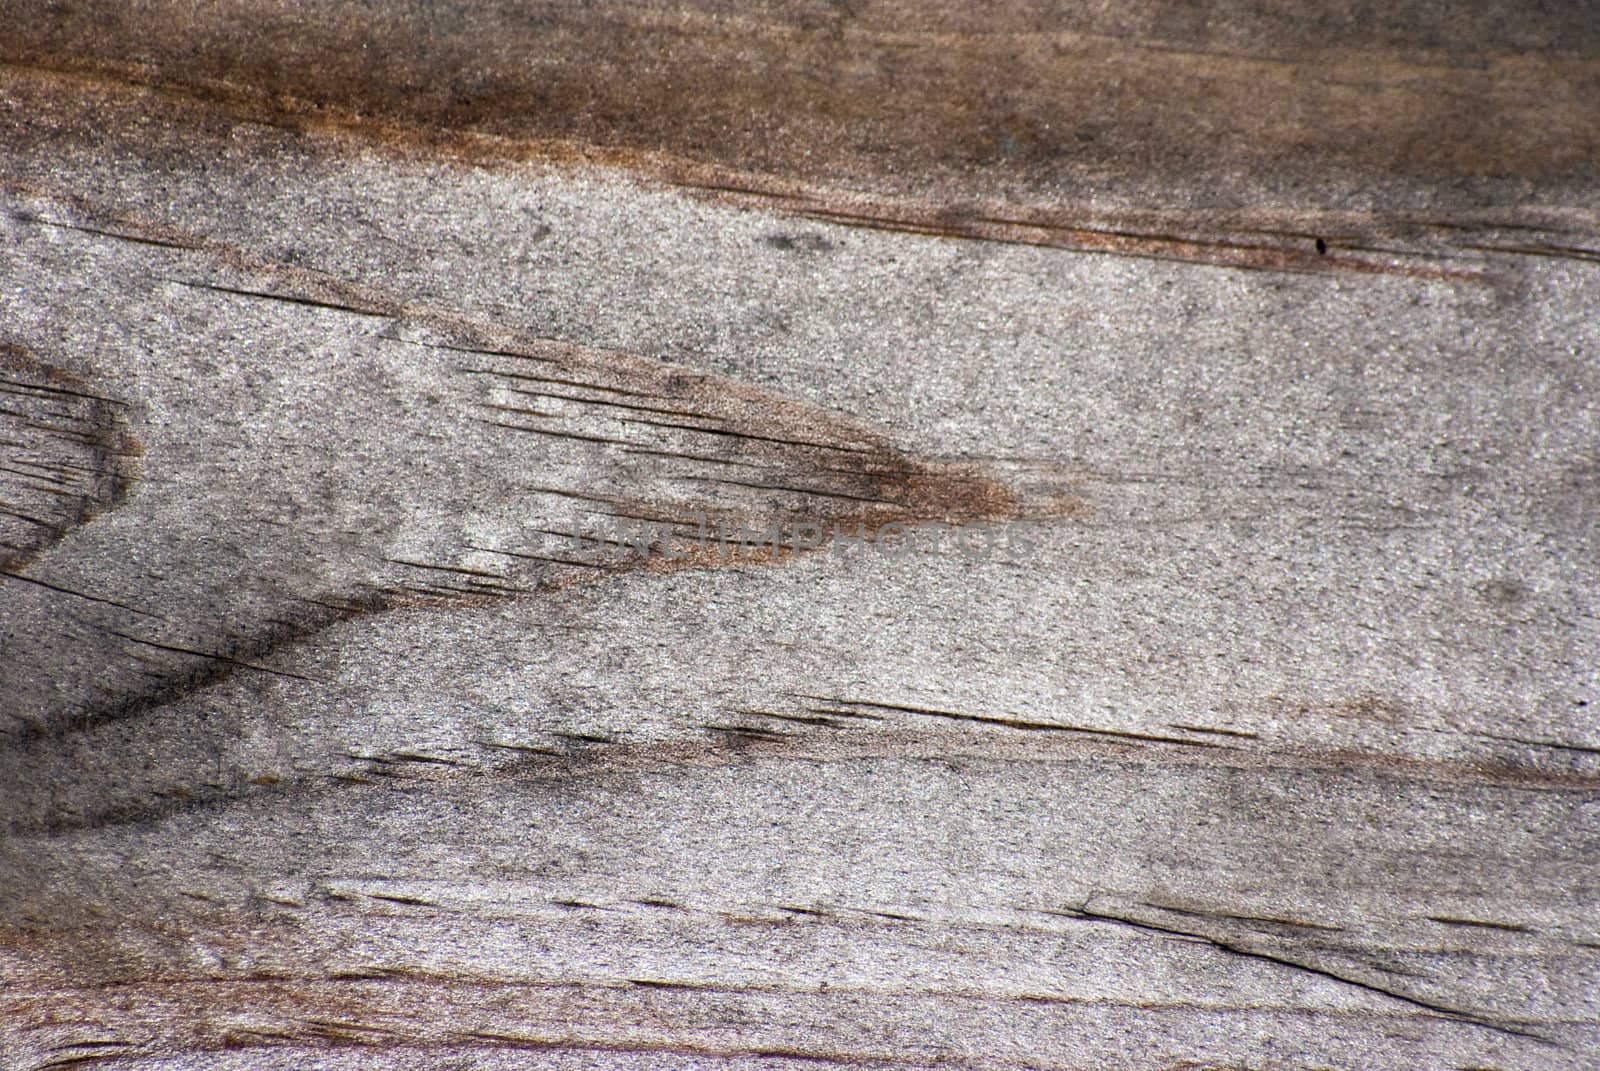 Weathered wood grain for use as a grunge background